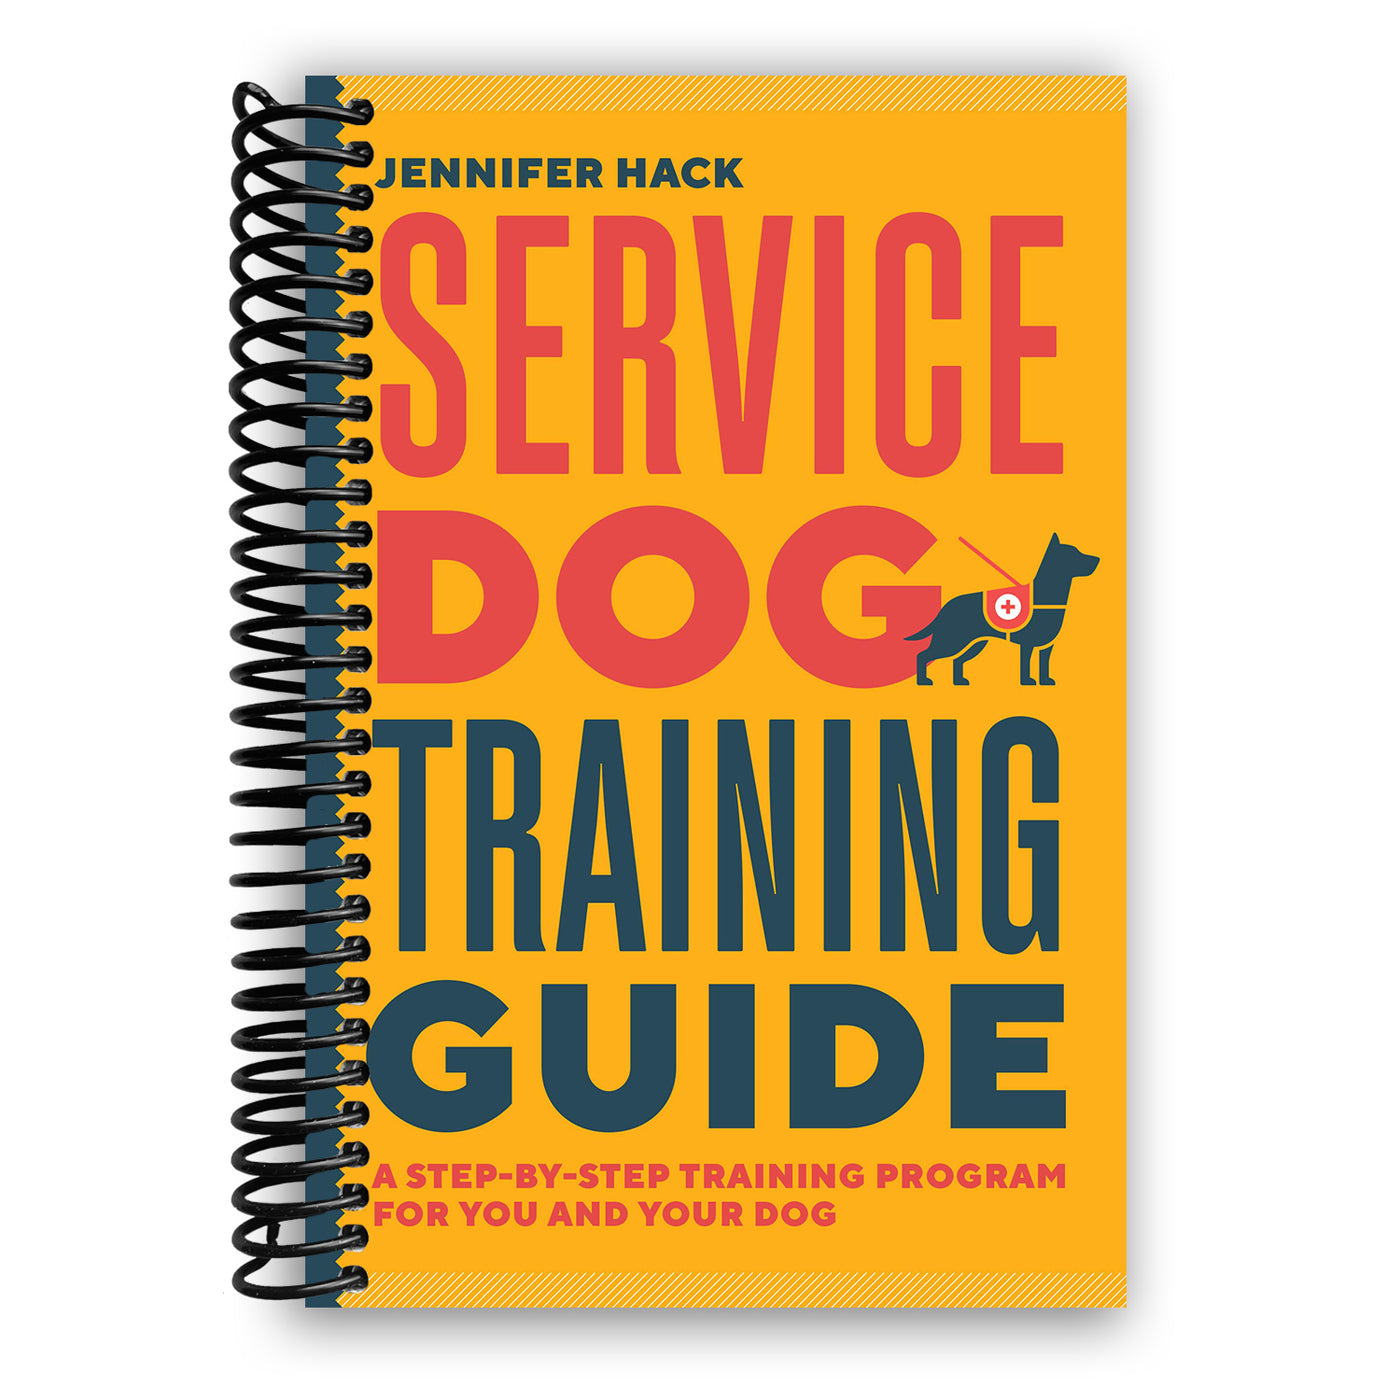 Service Dog Training Guide: A Step-by-Step Training Program for You and Your Dog (Spiral Bound)